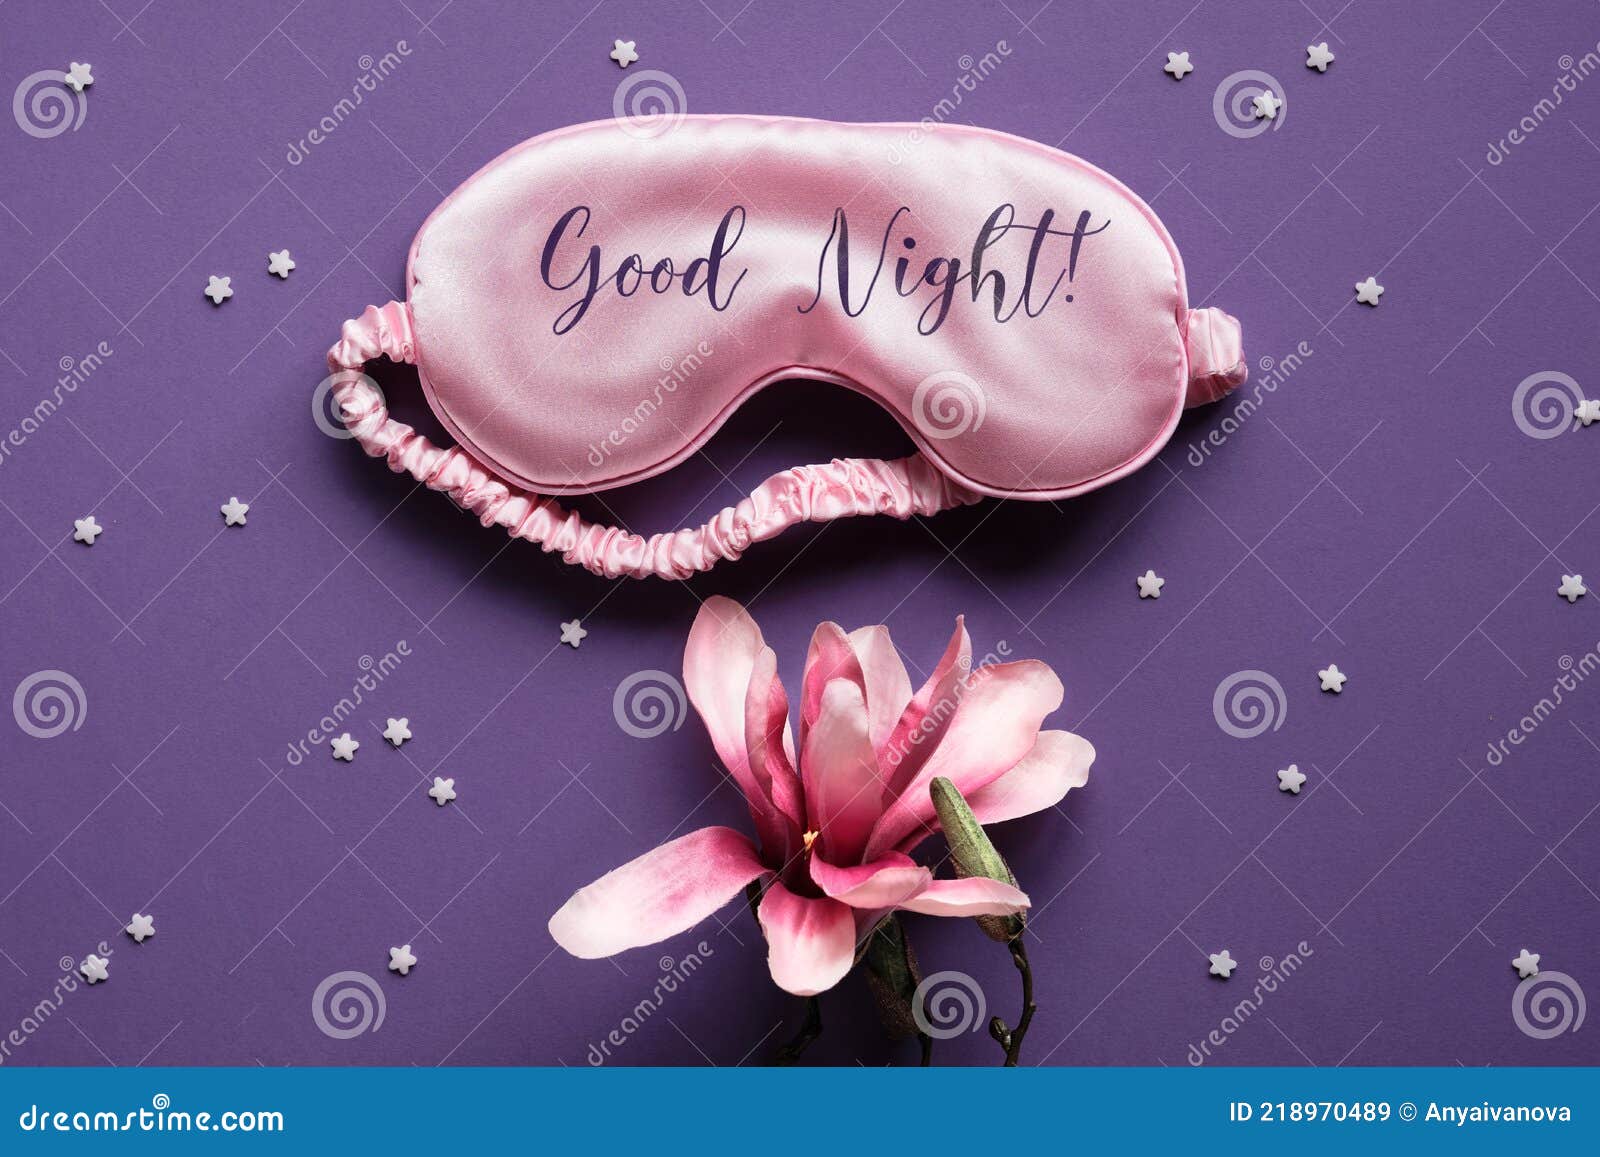 260 Good Night Pink Flower Stock Photos - Free & Royalty-Free Stock Photos  from Dreamstime